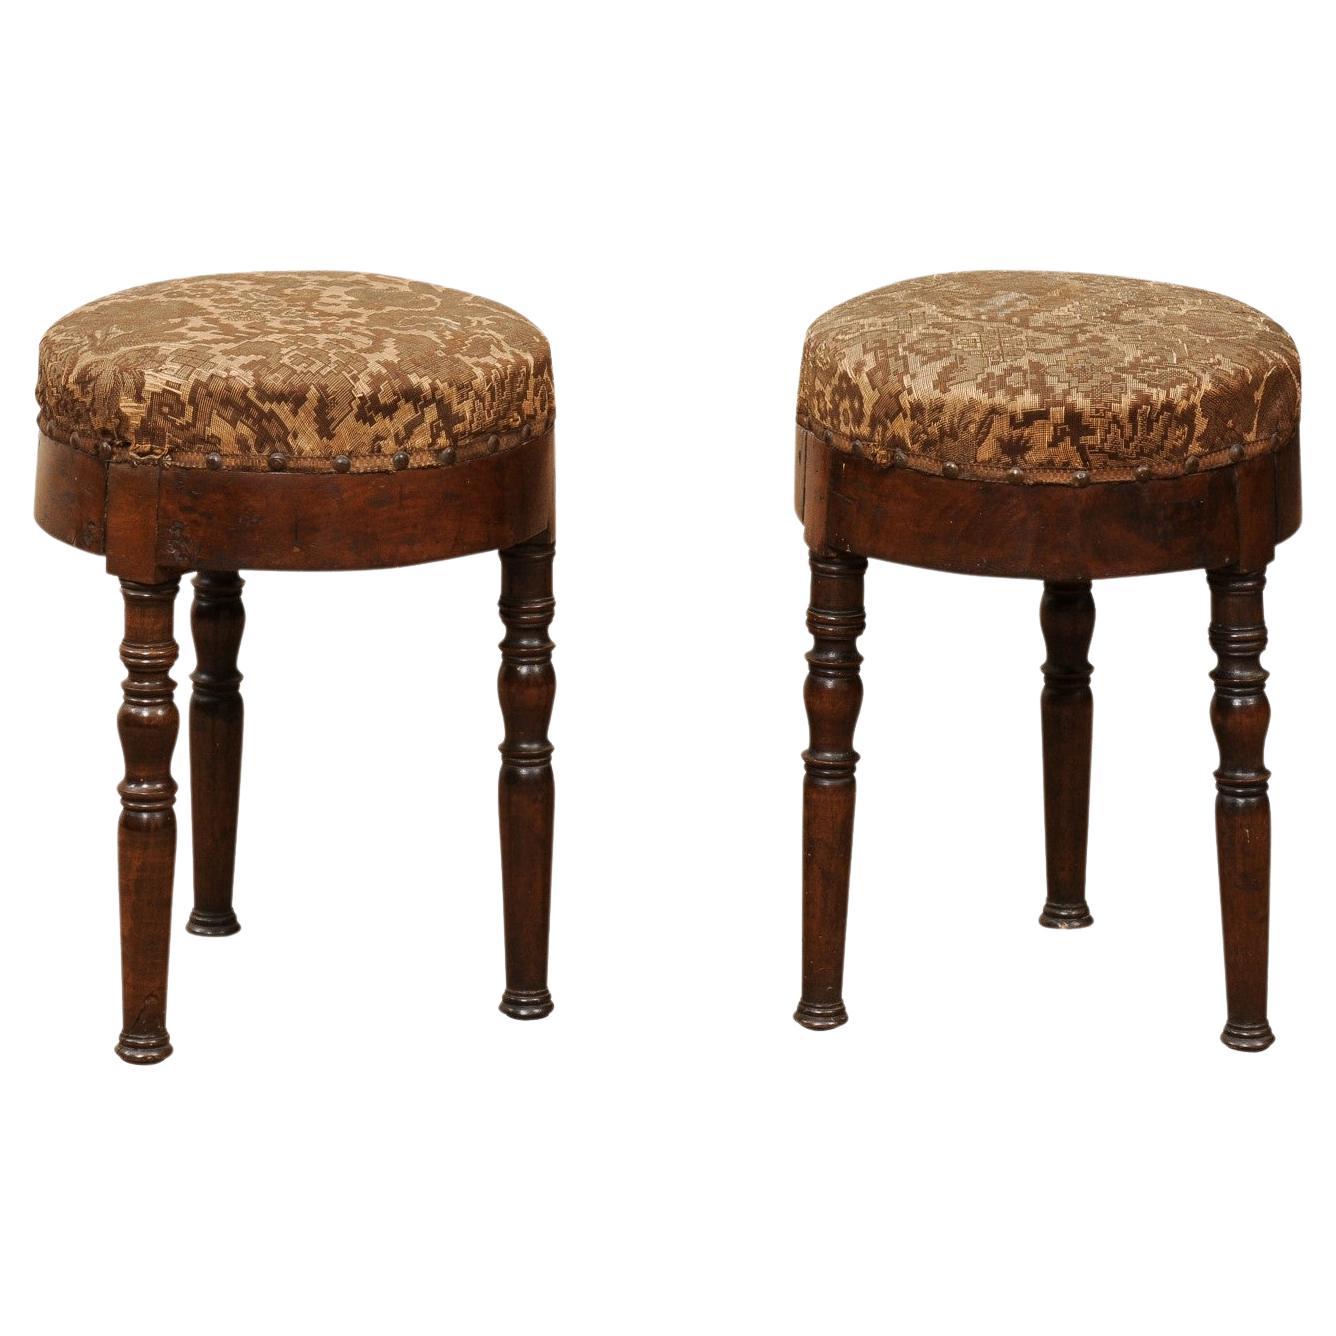 Italian 19th Century Round Walnut Stools with Turned Legs For Sale